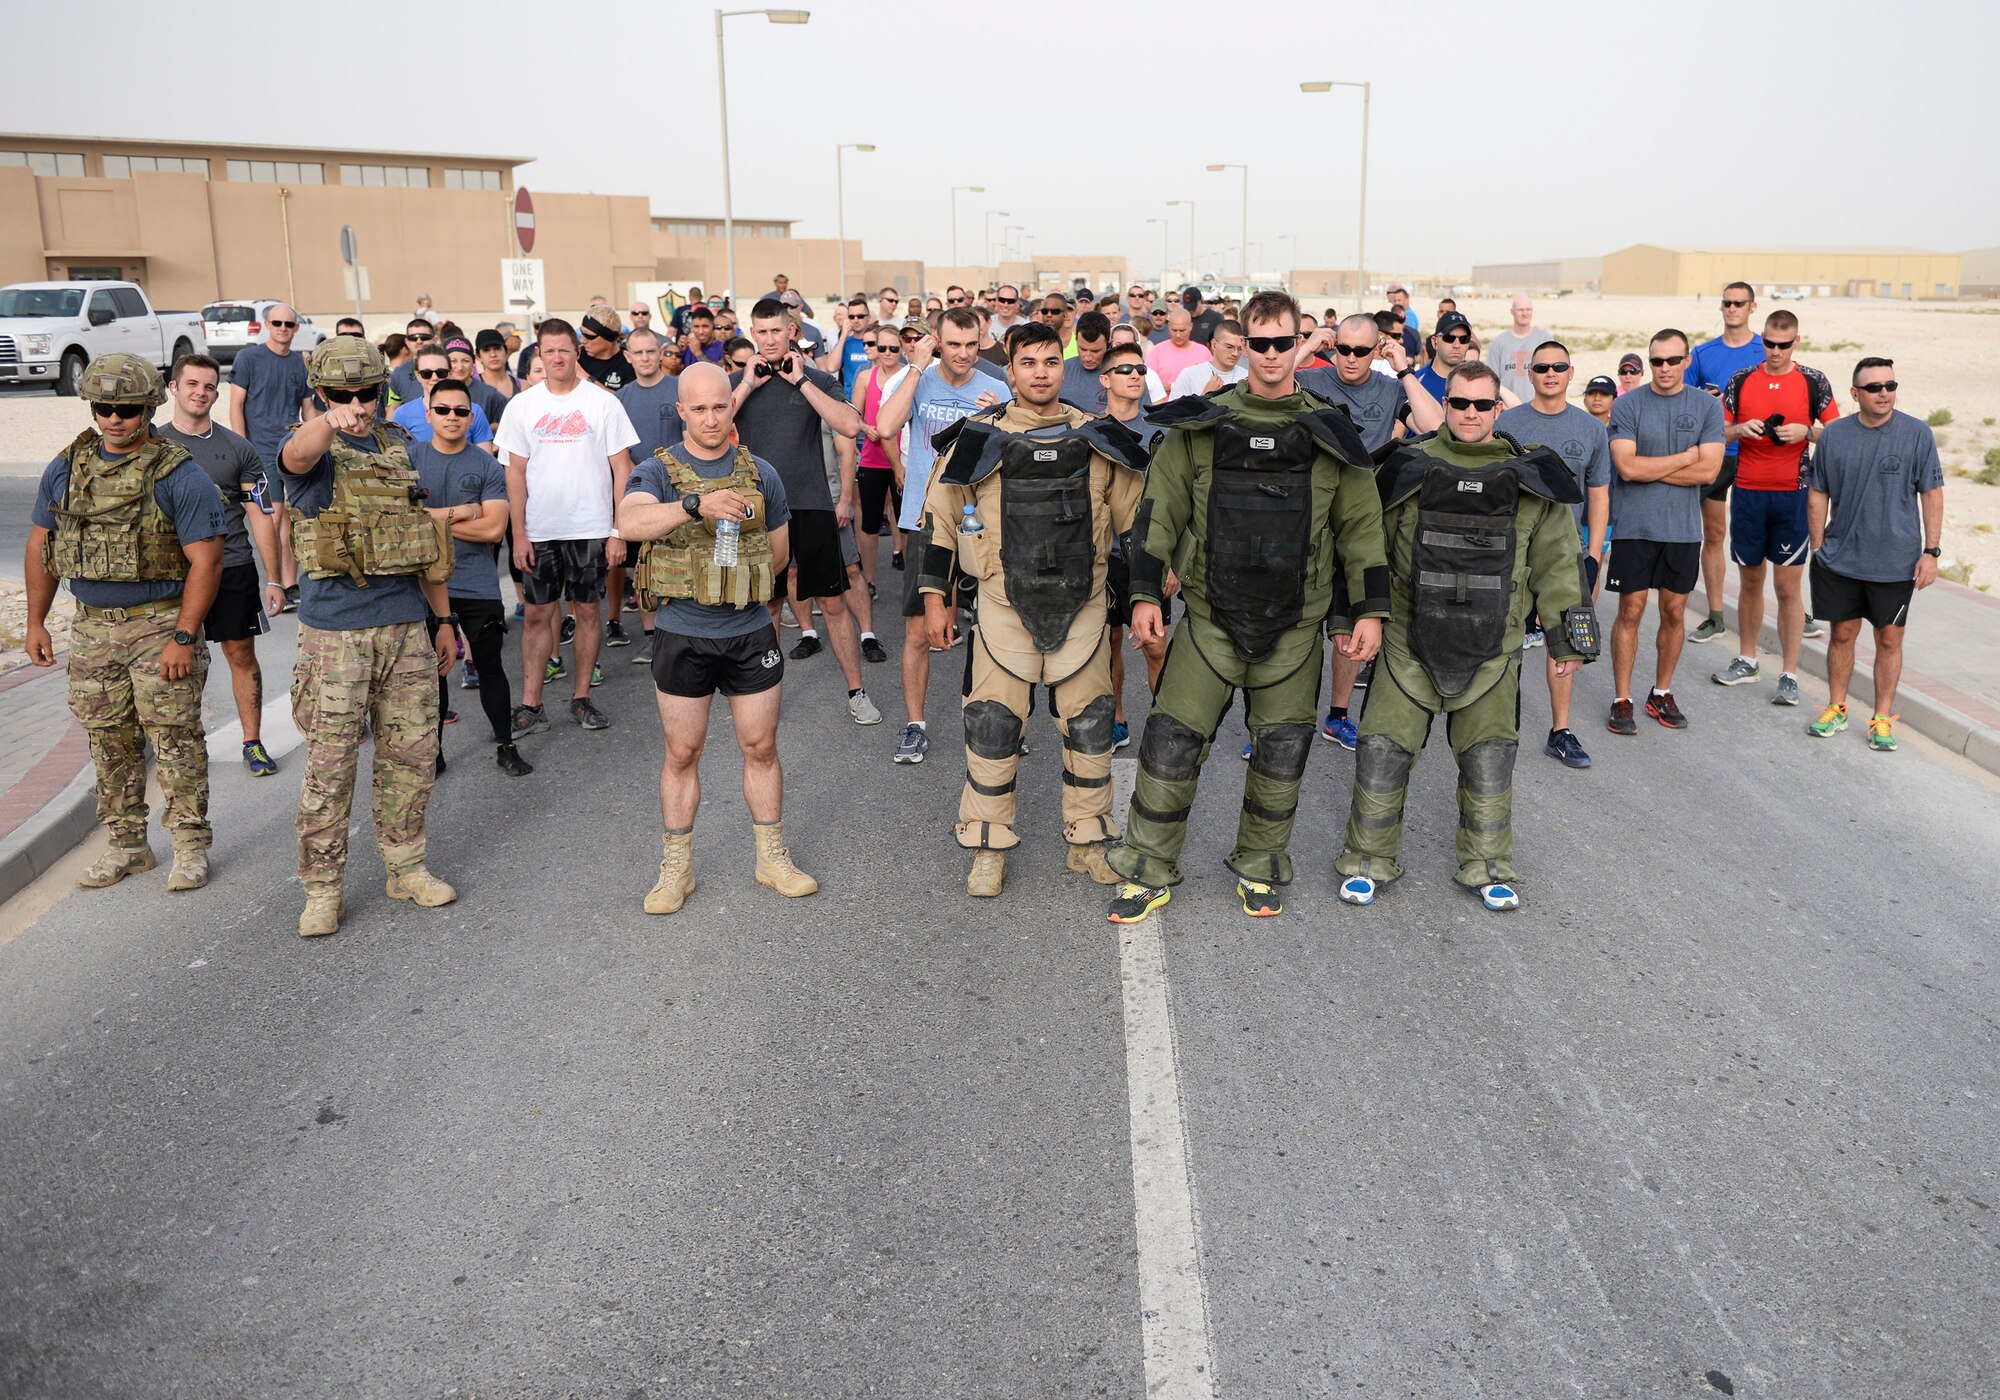 Dressed in bomb suits, U.S. Air Force Senior Airman Cory McLellan, left, and Staff Sgts. Brent Points center, and Jason Evans, right, explosive ordinance disposal technicians assigned to the 379th Civil Engineering Squadron, prepare to lead a group of runners during the annual EOD 5K Memorial Run at Al Udeid Air Base, Qatar, June 3, 2017. Service members from across the base gathered to take part in the EOD 5K Memorial Run in memory of the EOD men and women killed in action during combat operations. (U.S. Air Force photo by Tech. Sgt. Bradly A. Schneider/Released)